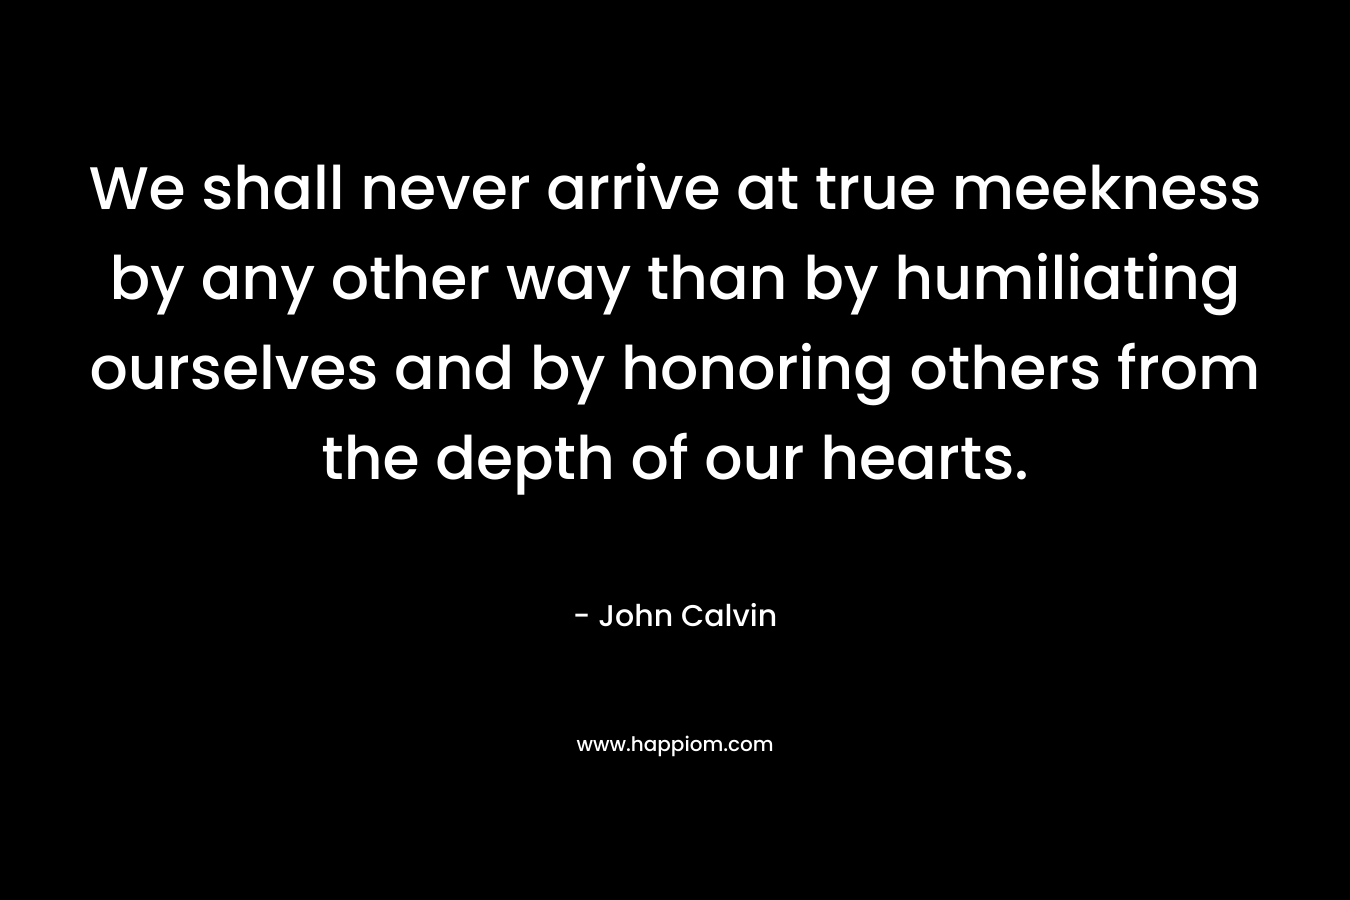 We shall never arrive at true meekness by any other way than by humiliating ourselves and by honoring others from the depth of our hearts. – John Calvin